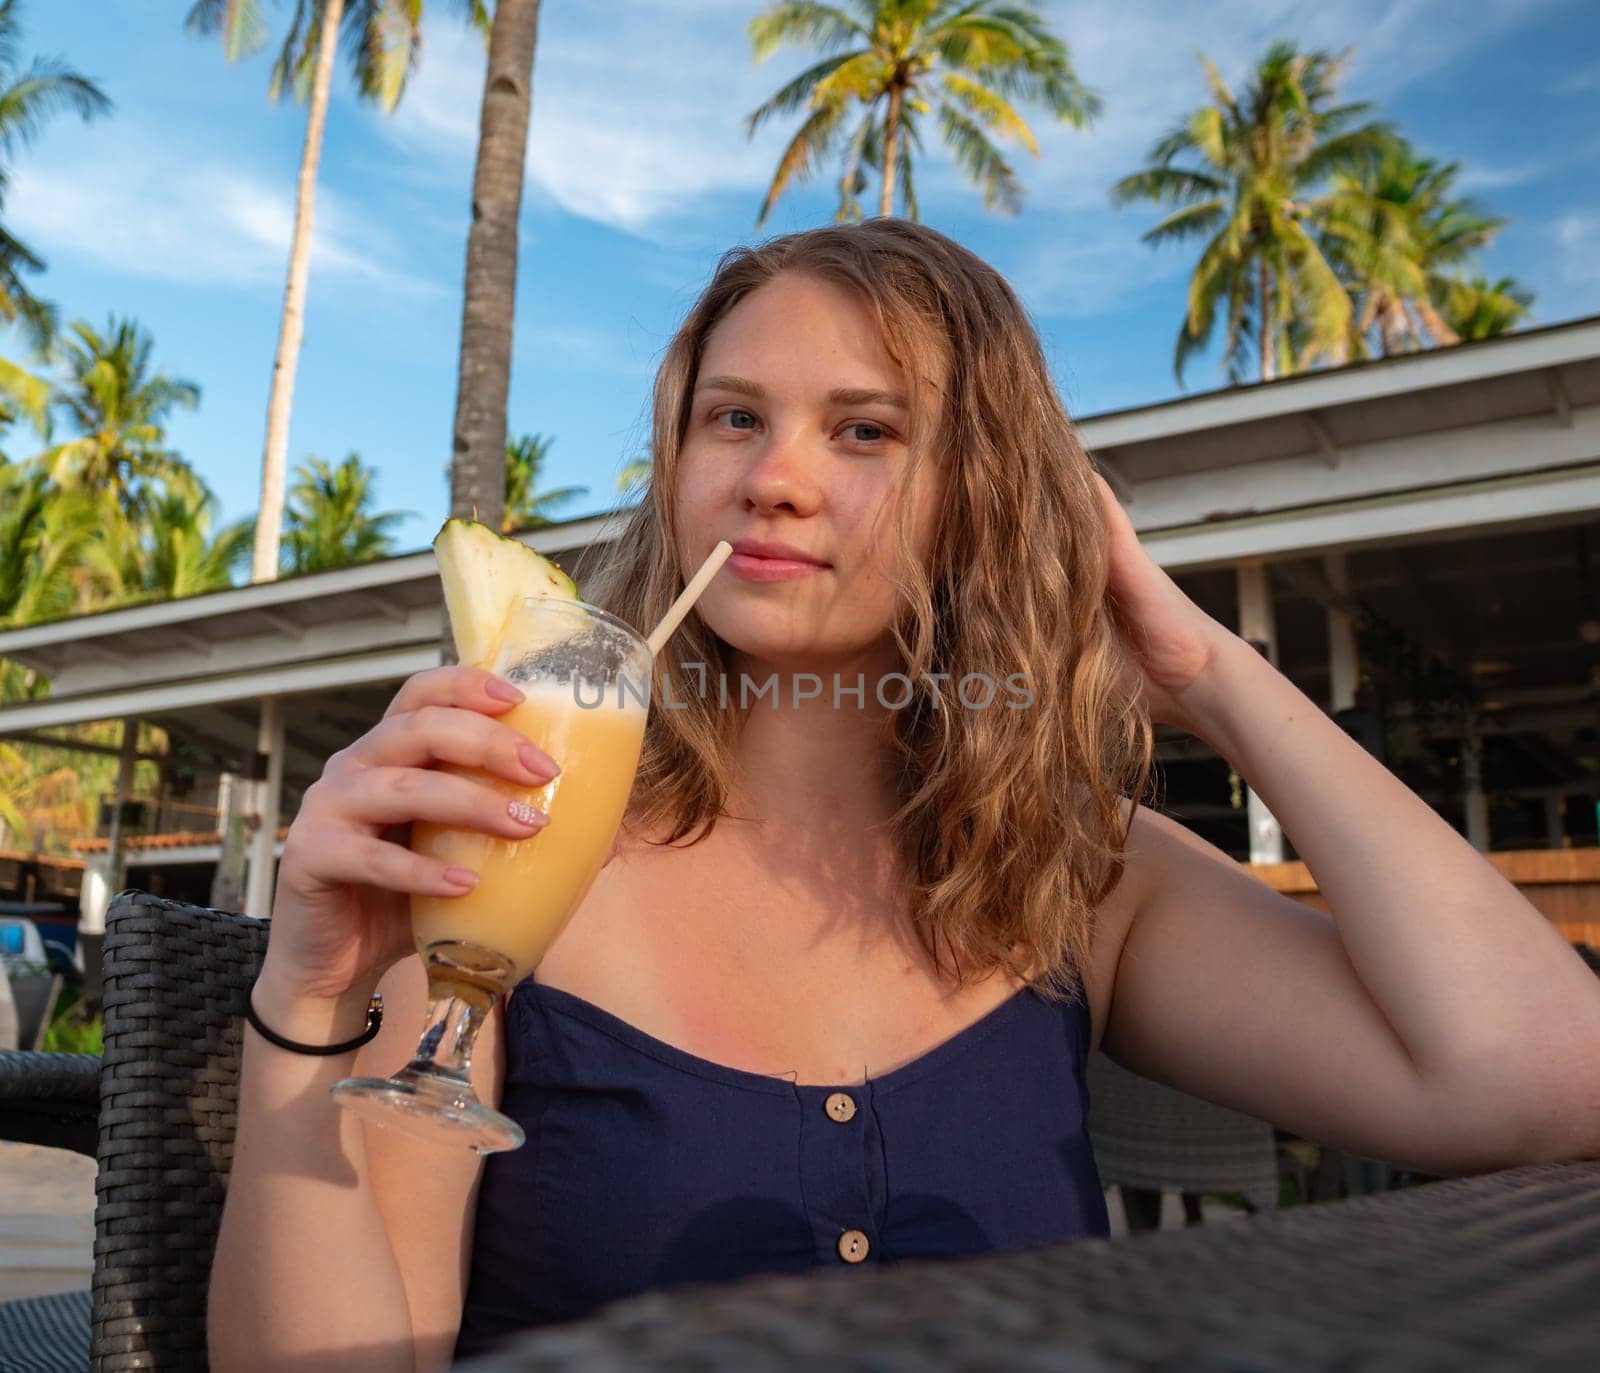 A young woman sips on a tropical beverage while sitting at an outdoor restaurant. Palm trees and a blue sky with scattered clouds are visible in the background.